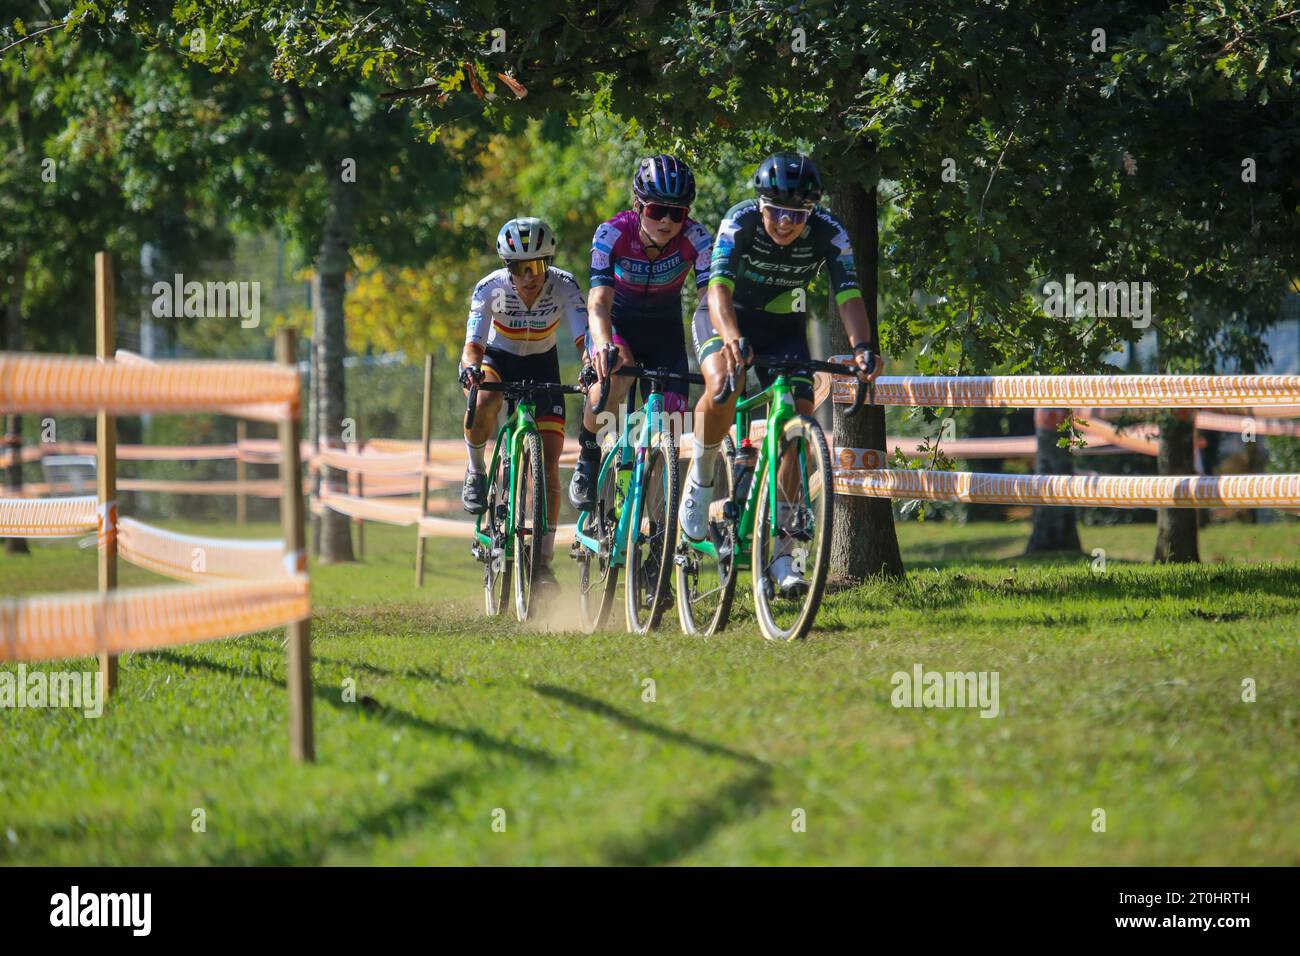 Pontevedra, Spain, 07th October, 2023: Nesta - MMR CX Team cyclist Sofia Rodriguez (3, R) leads the race ahead of Laura Verdonschot (2) and Lucia Gonzalez (1, L) during the women's elite race of the Grand Prix Cidade de Pontevedra 2023, on October 7, 2023, in Pontevedra, Spain. Credit: Alberto Brevers / Alamy Live News. Stock Photo